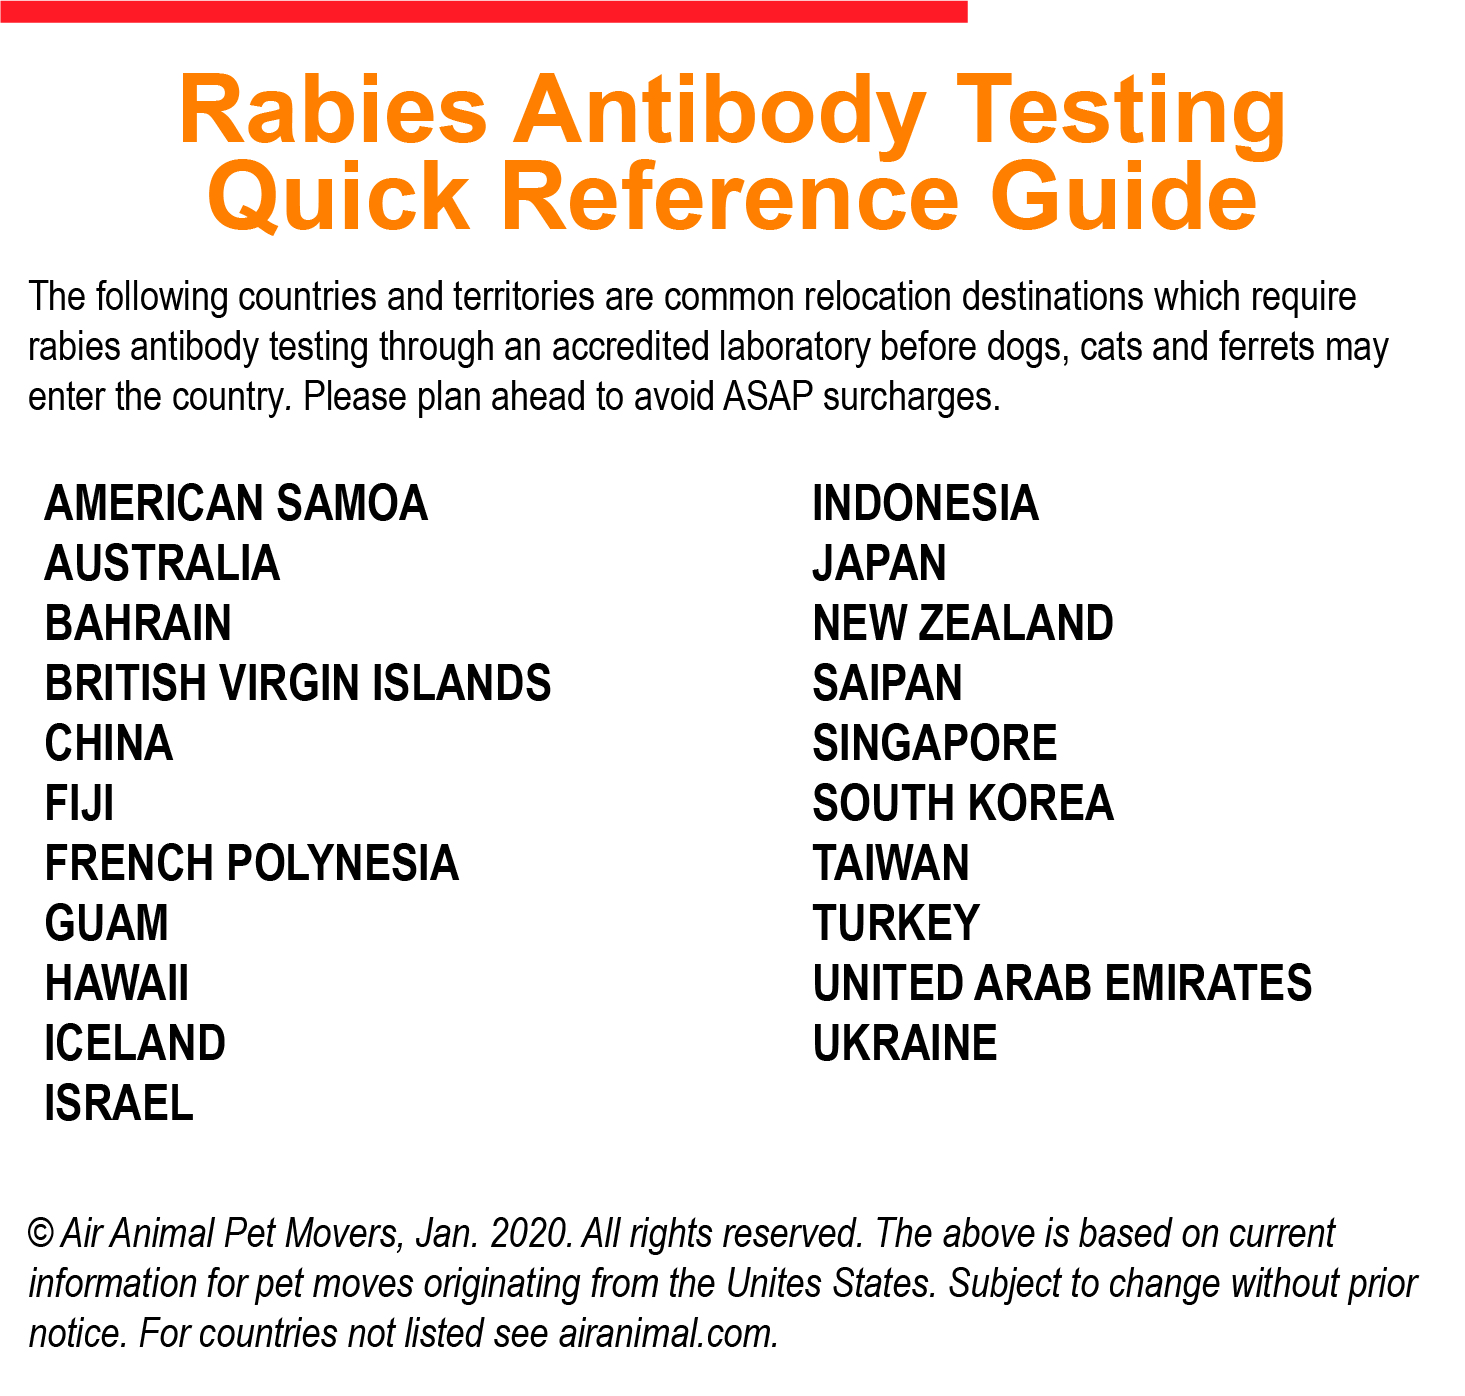 Know Before You Go—Rabies Antibody Testing